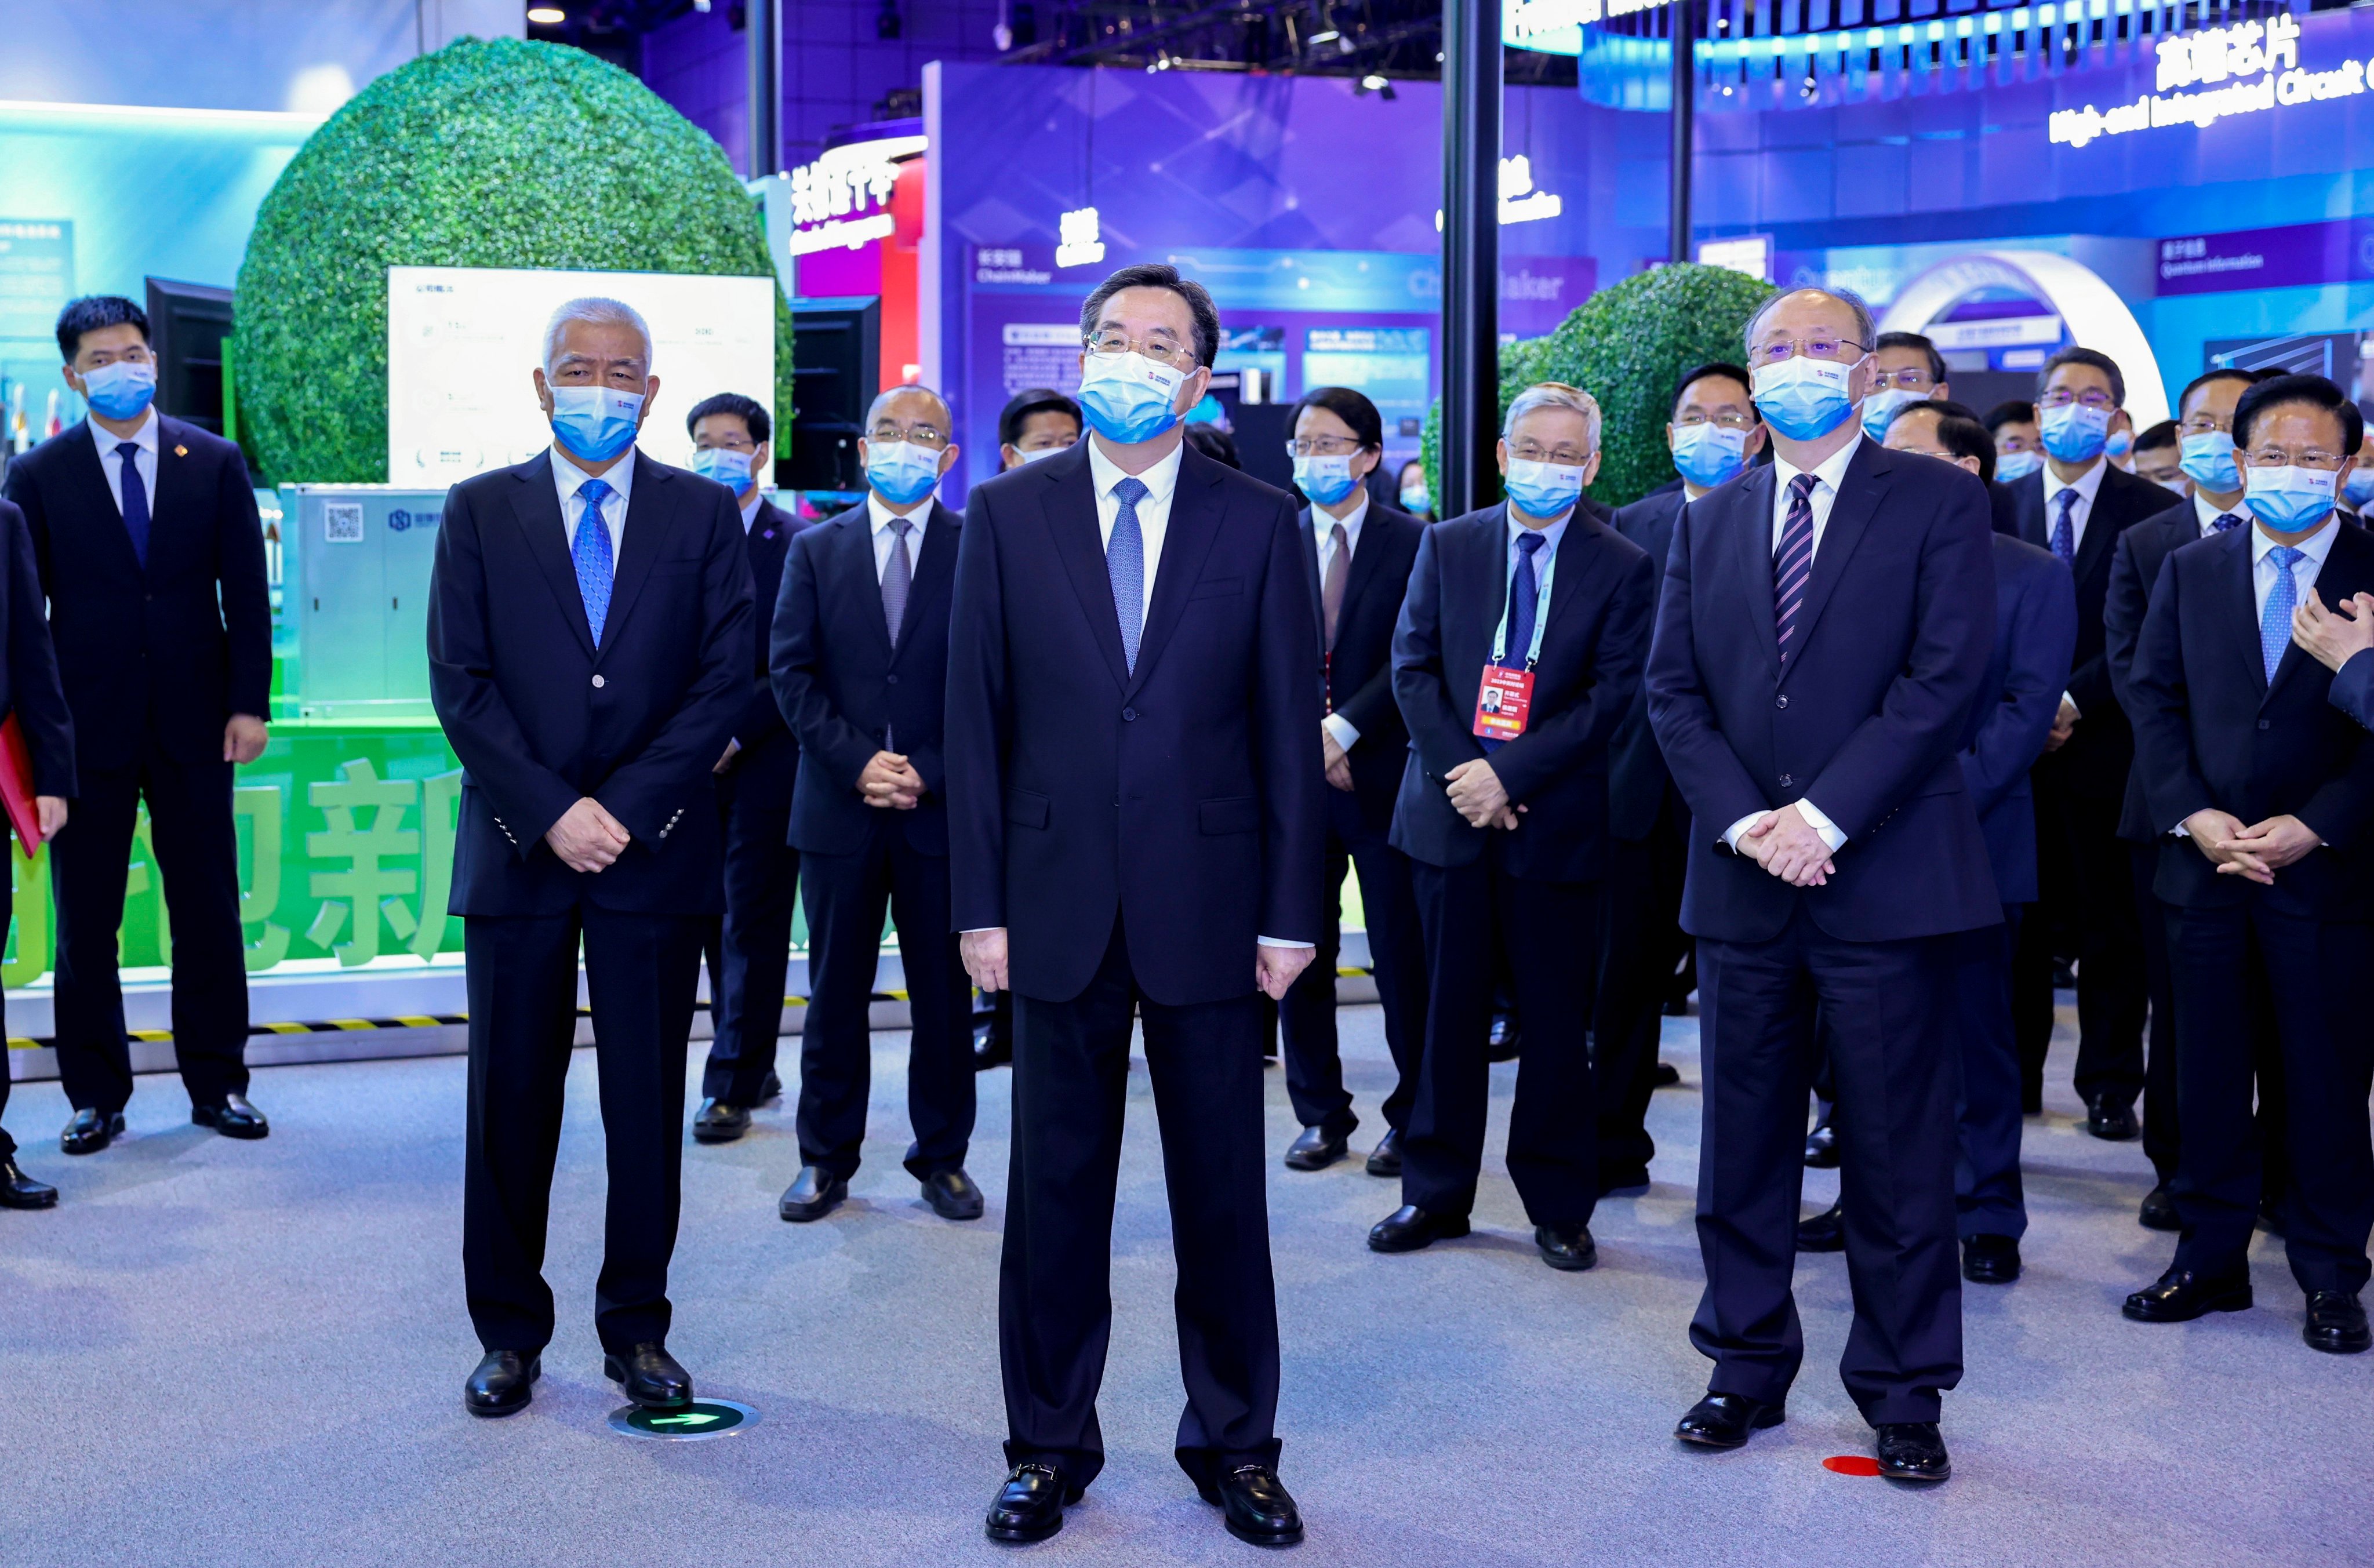 Chinese vice-premier Ding Xuexiang (centre) at the Zhongguancun Forum, which focuses on China’s technology development. Photo: Xinhua